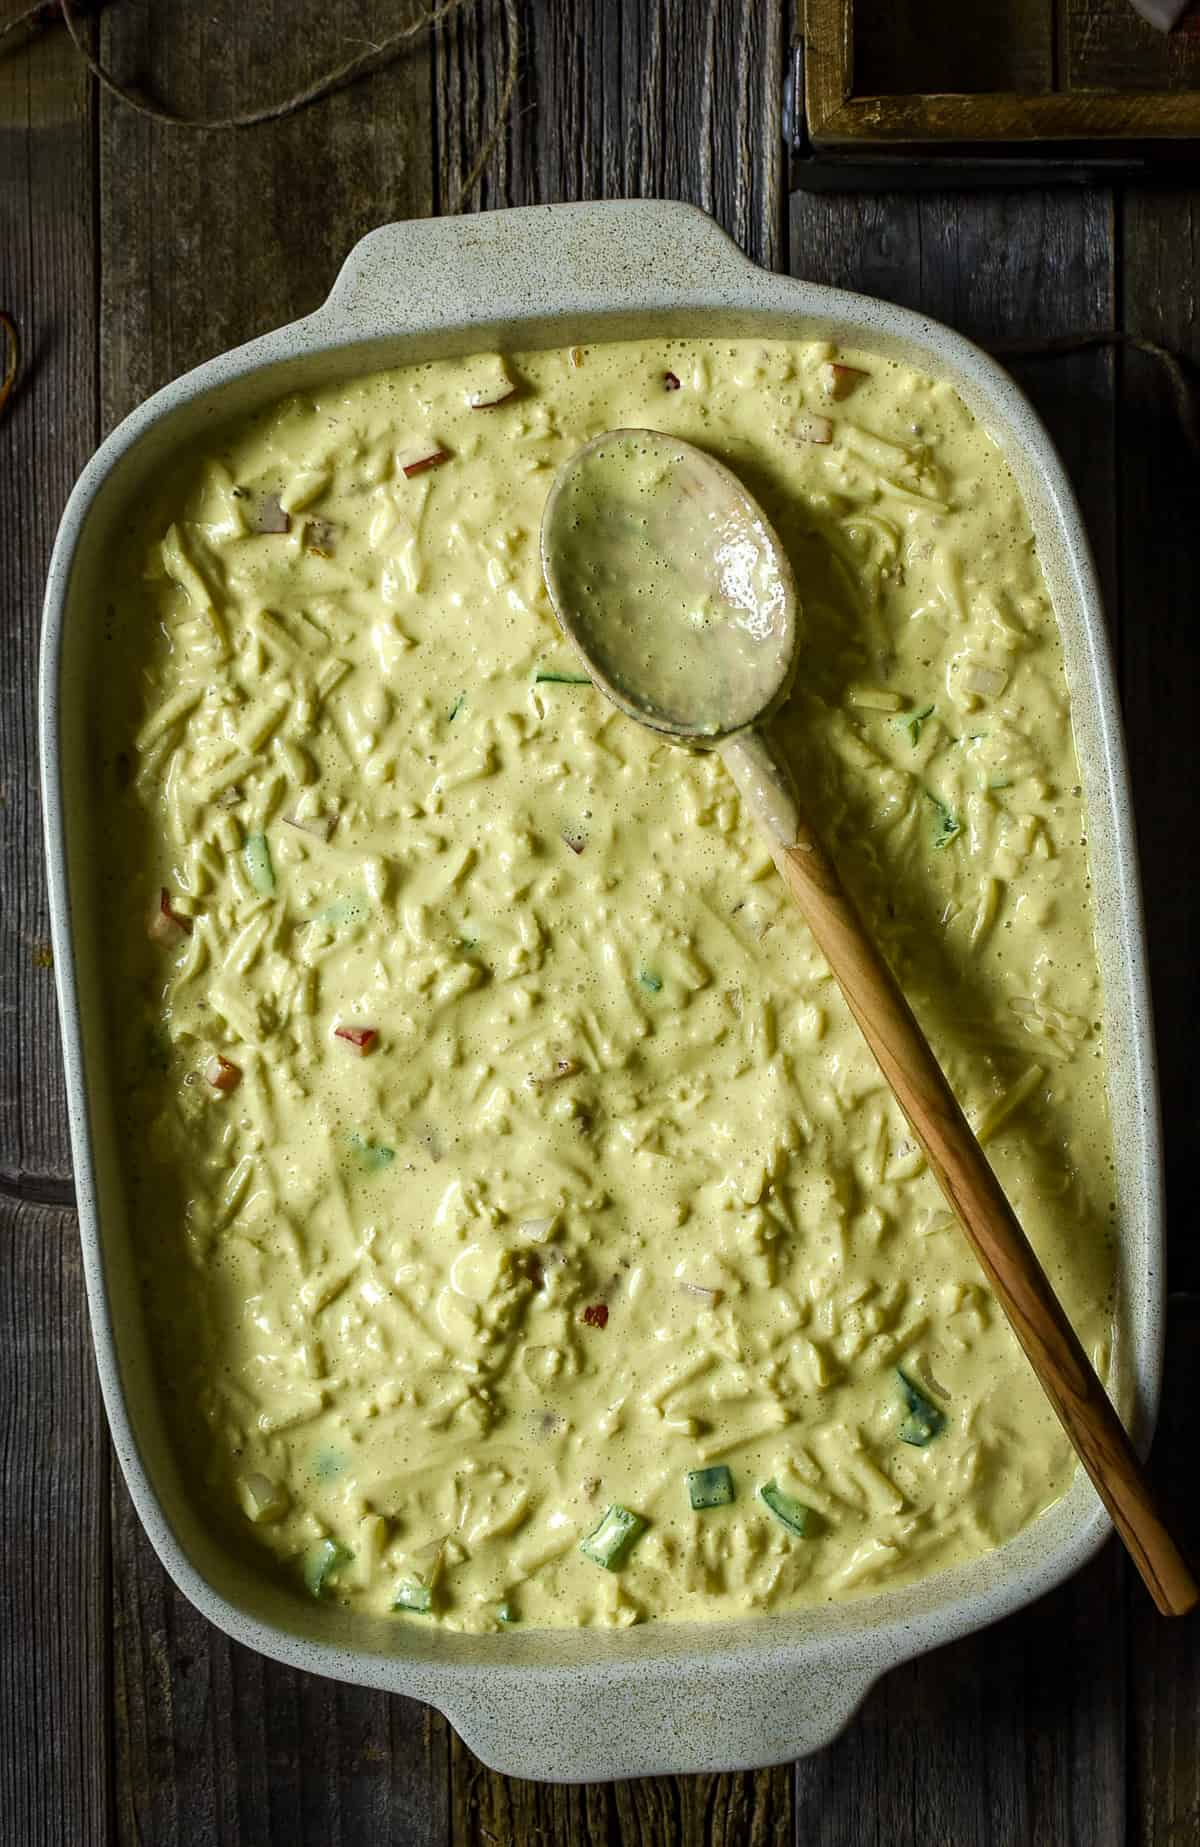 Breakfast casserole ingredients in a baking dish with wooden spoon on top.